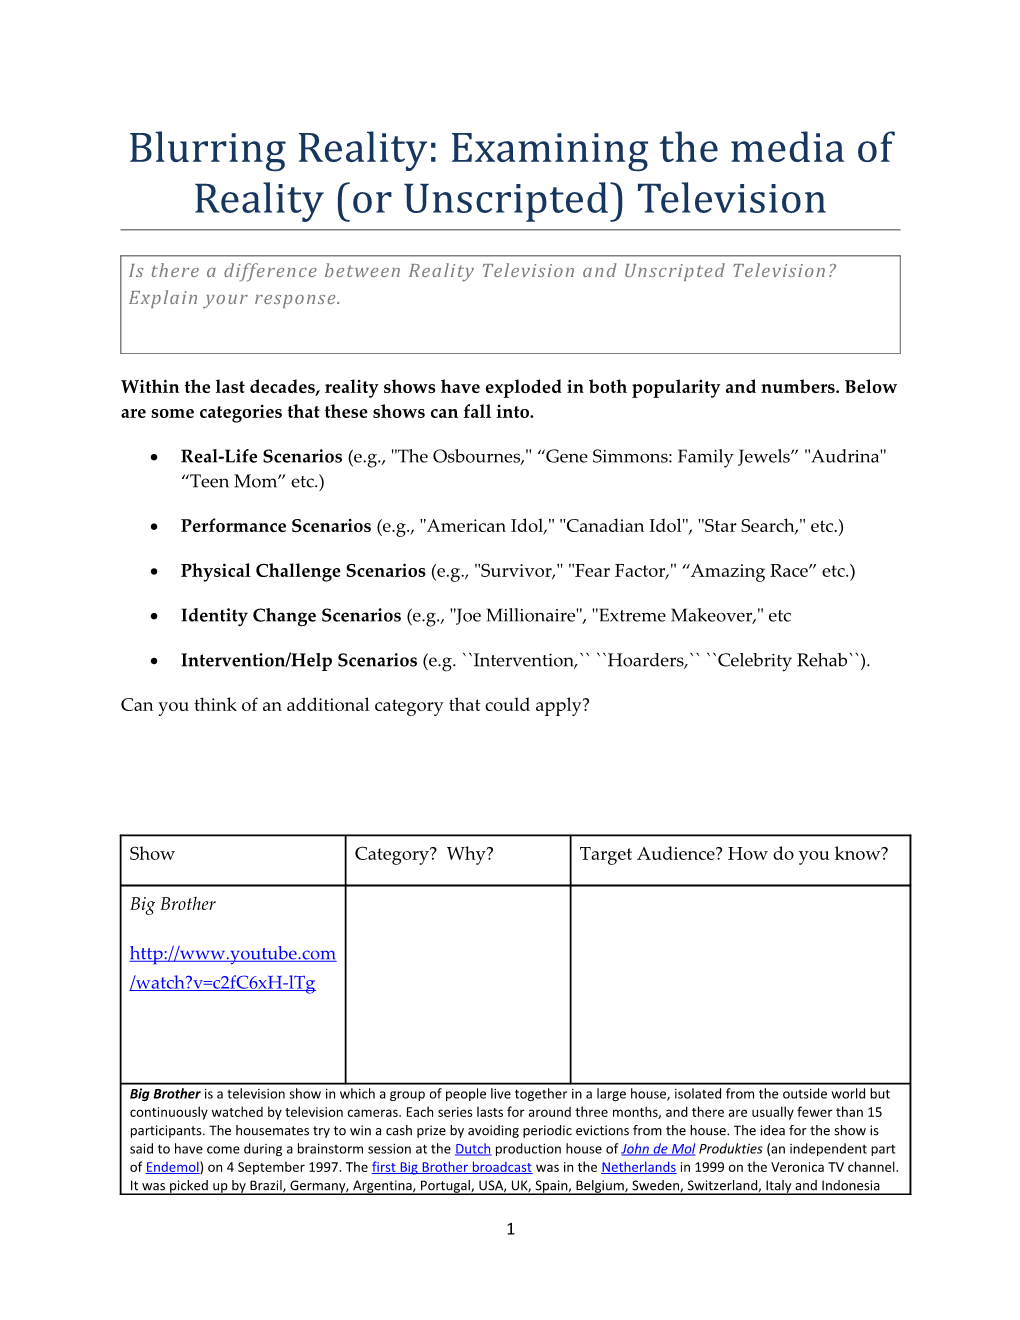 Blurring Reality: Examining the Media of Reality (Or Unscripted) Television